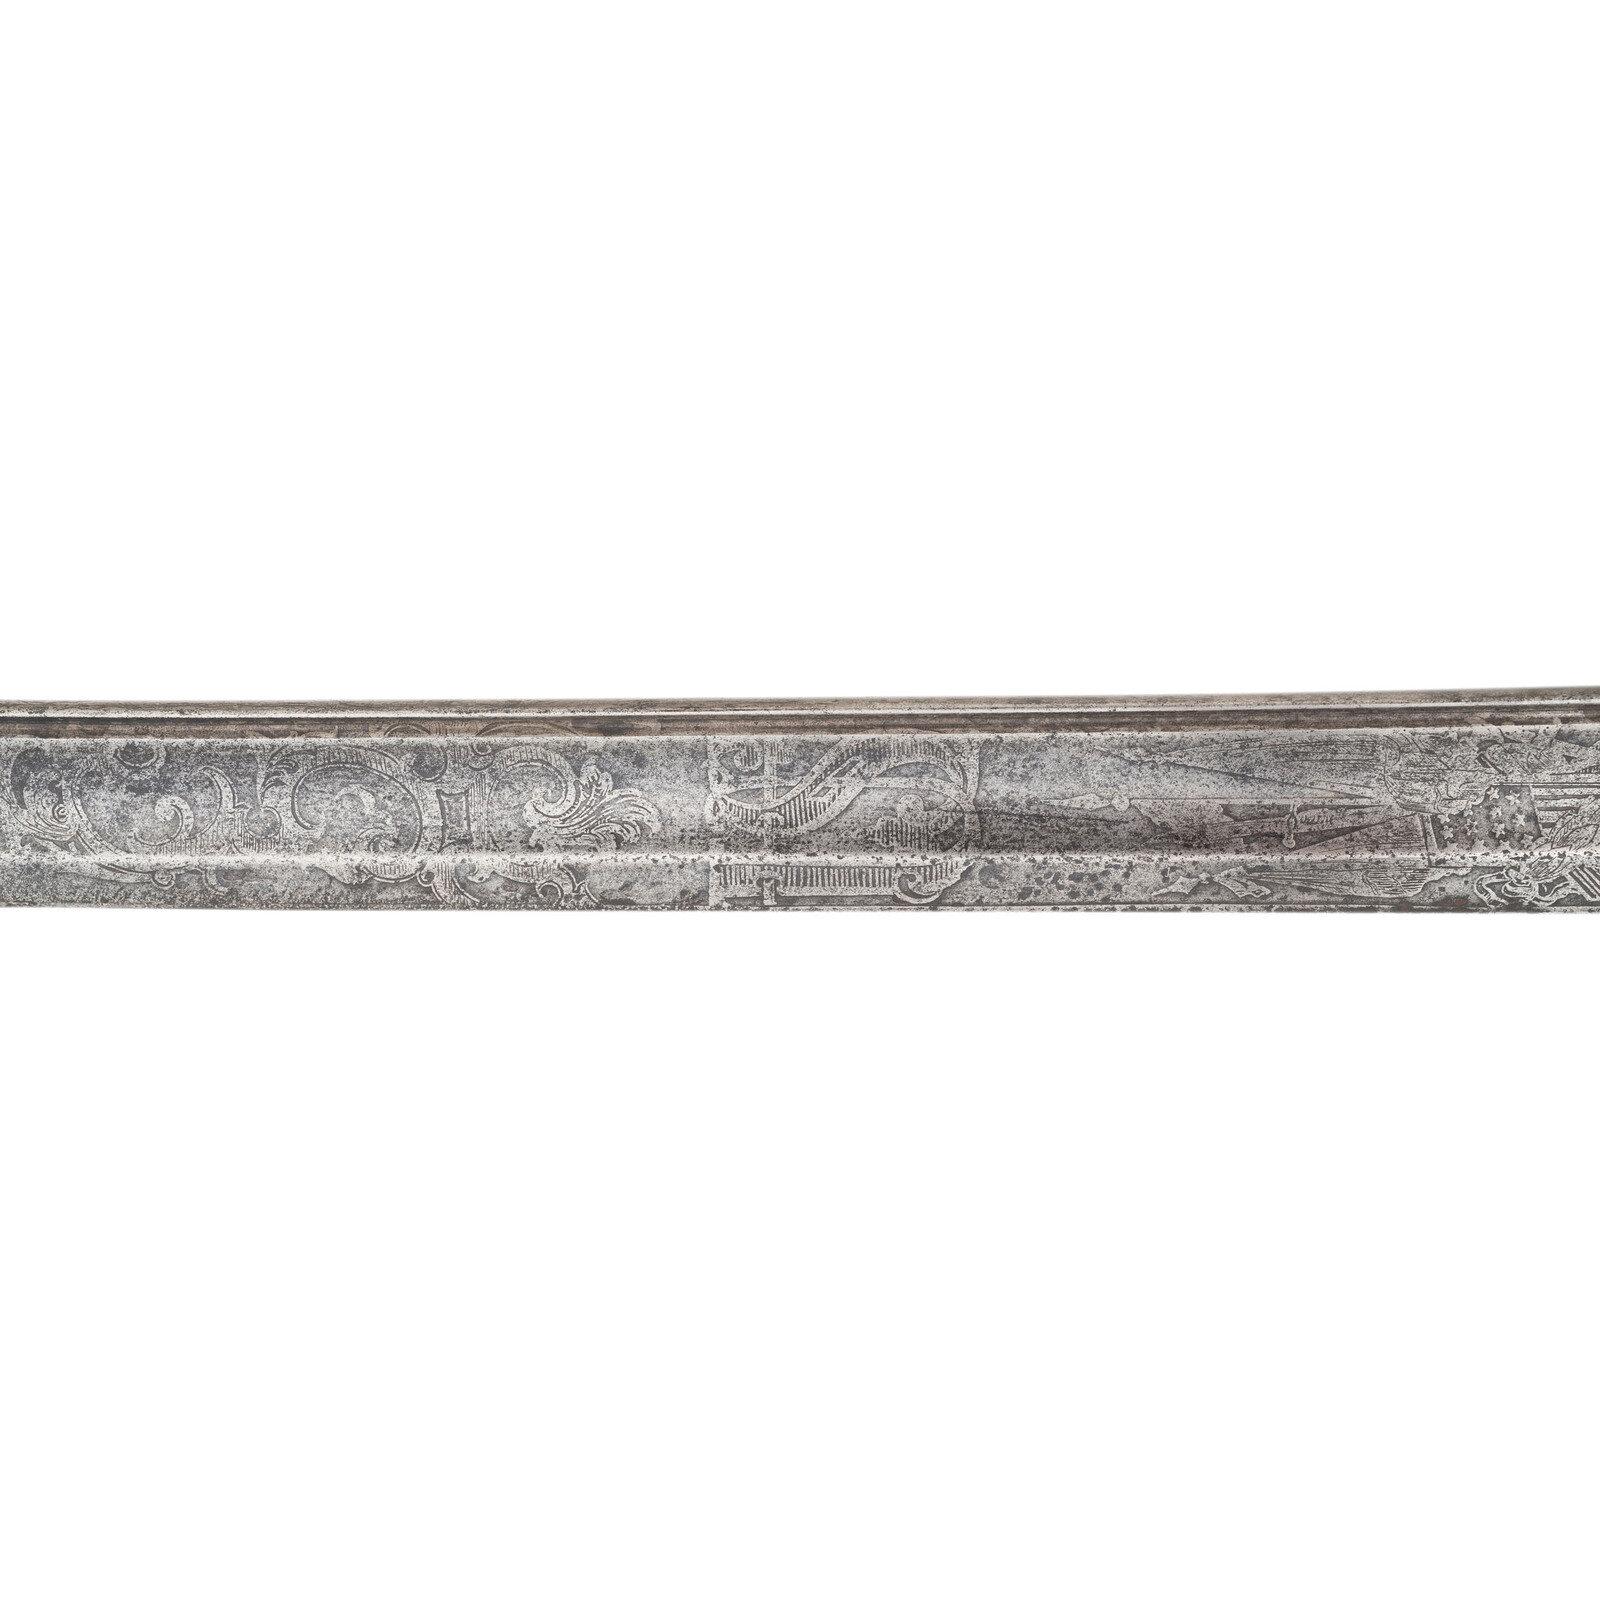 Schuyler, Hartley & Graham 1850 Foot Officers Sword of Capt. Charles Amory- POW at The Crater